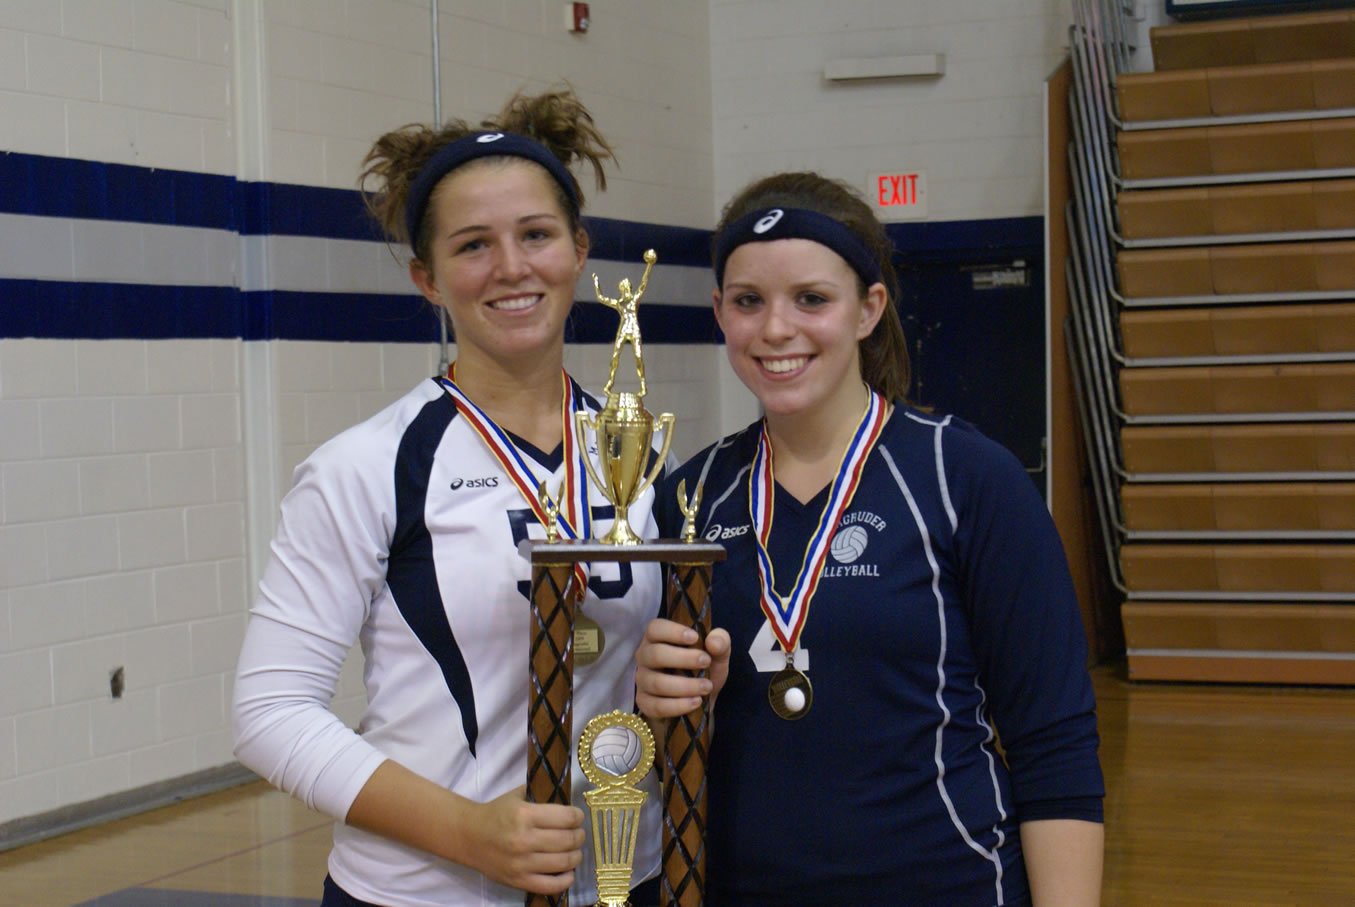 Michelle and Lisa with 2009 trophy